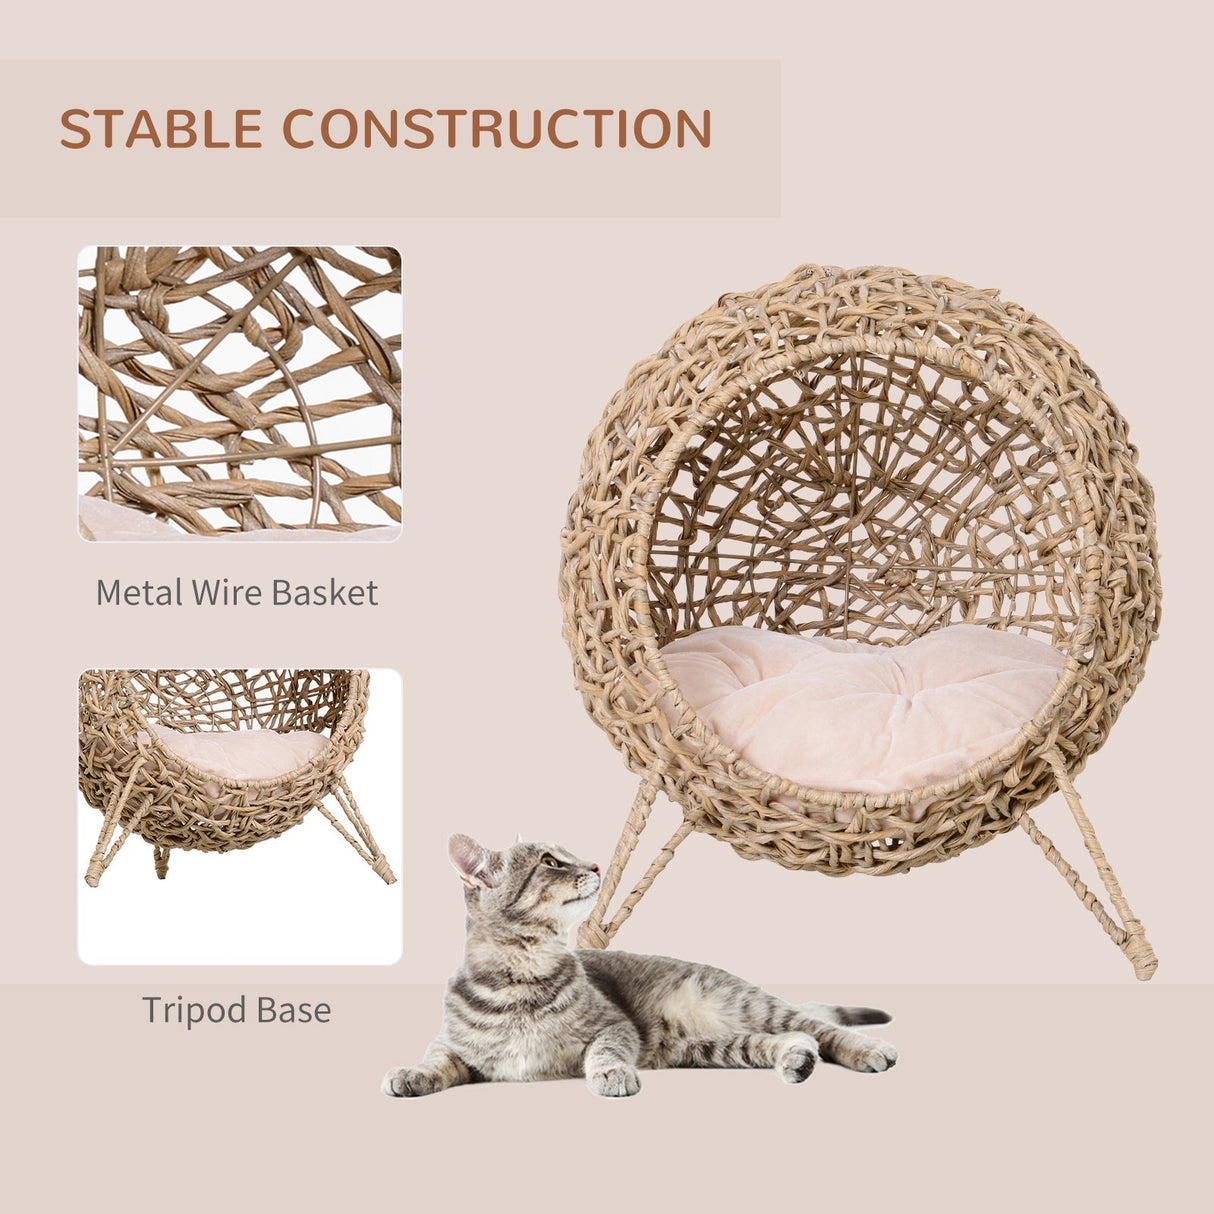 Rattan Elevated Cat Bed House Kitten Basket Ball Shaped Pet Furniture w/ Removable Cushion, PawHut, Natural